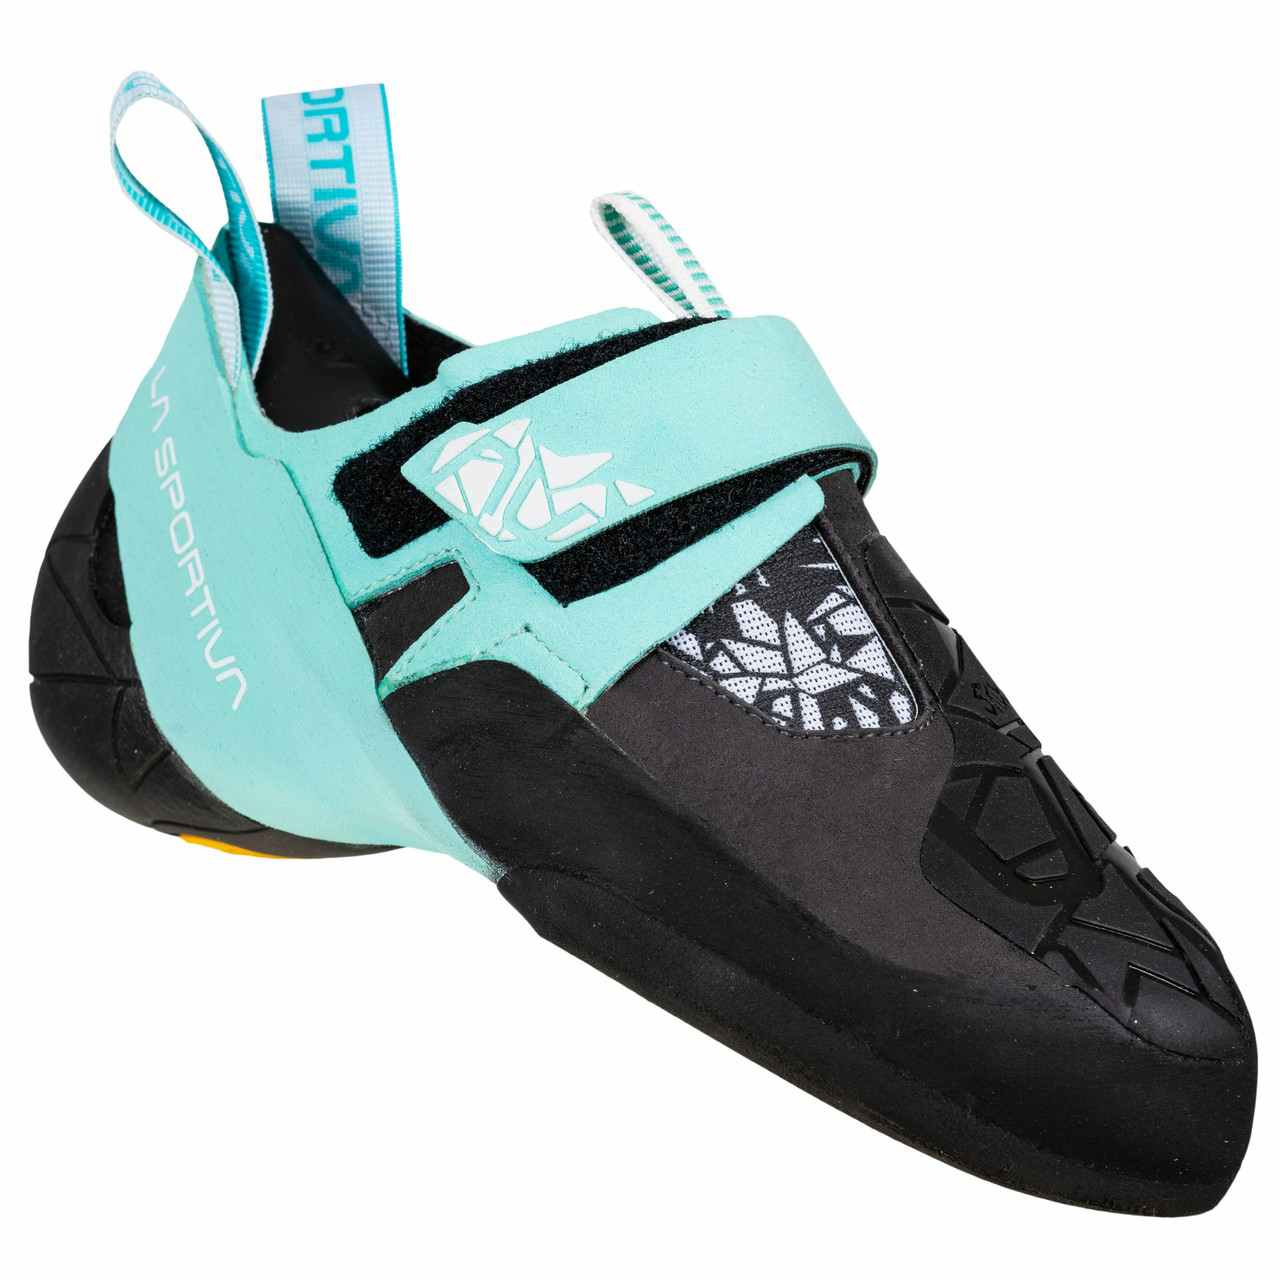 Chaussons Skwama Vegan Carbone/Turquoise